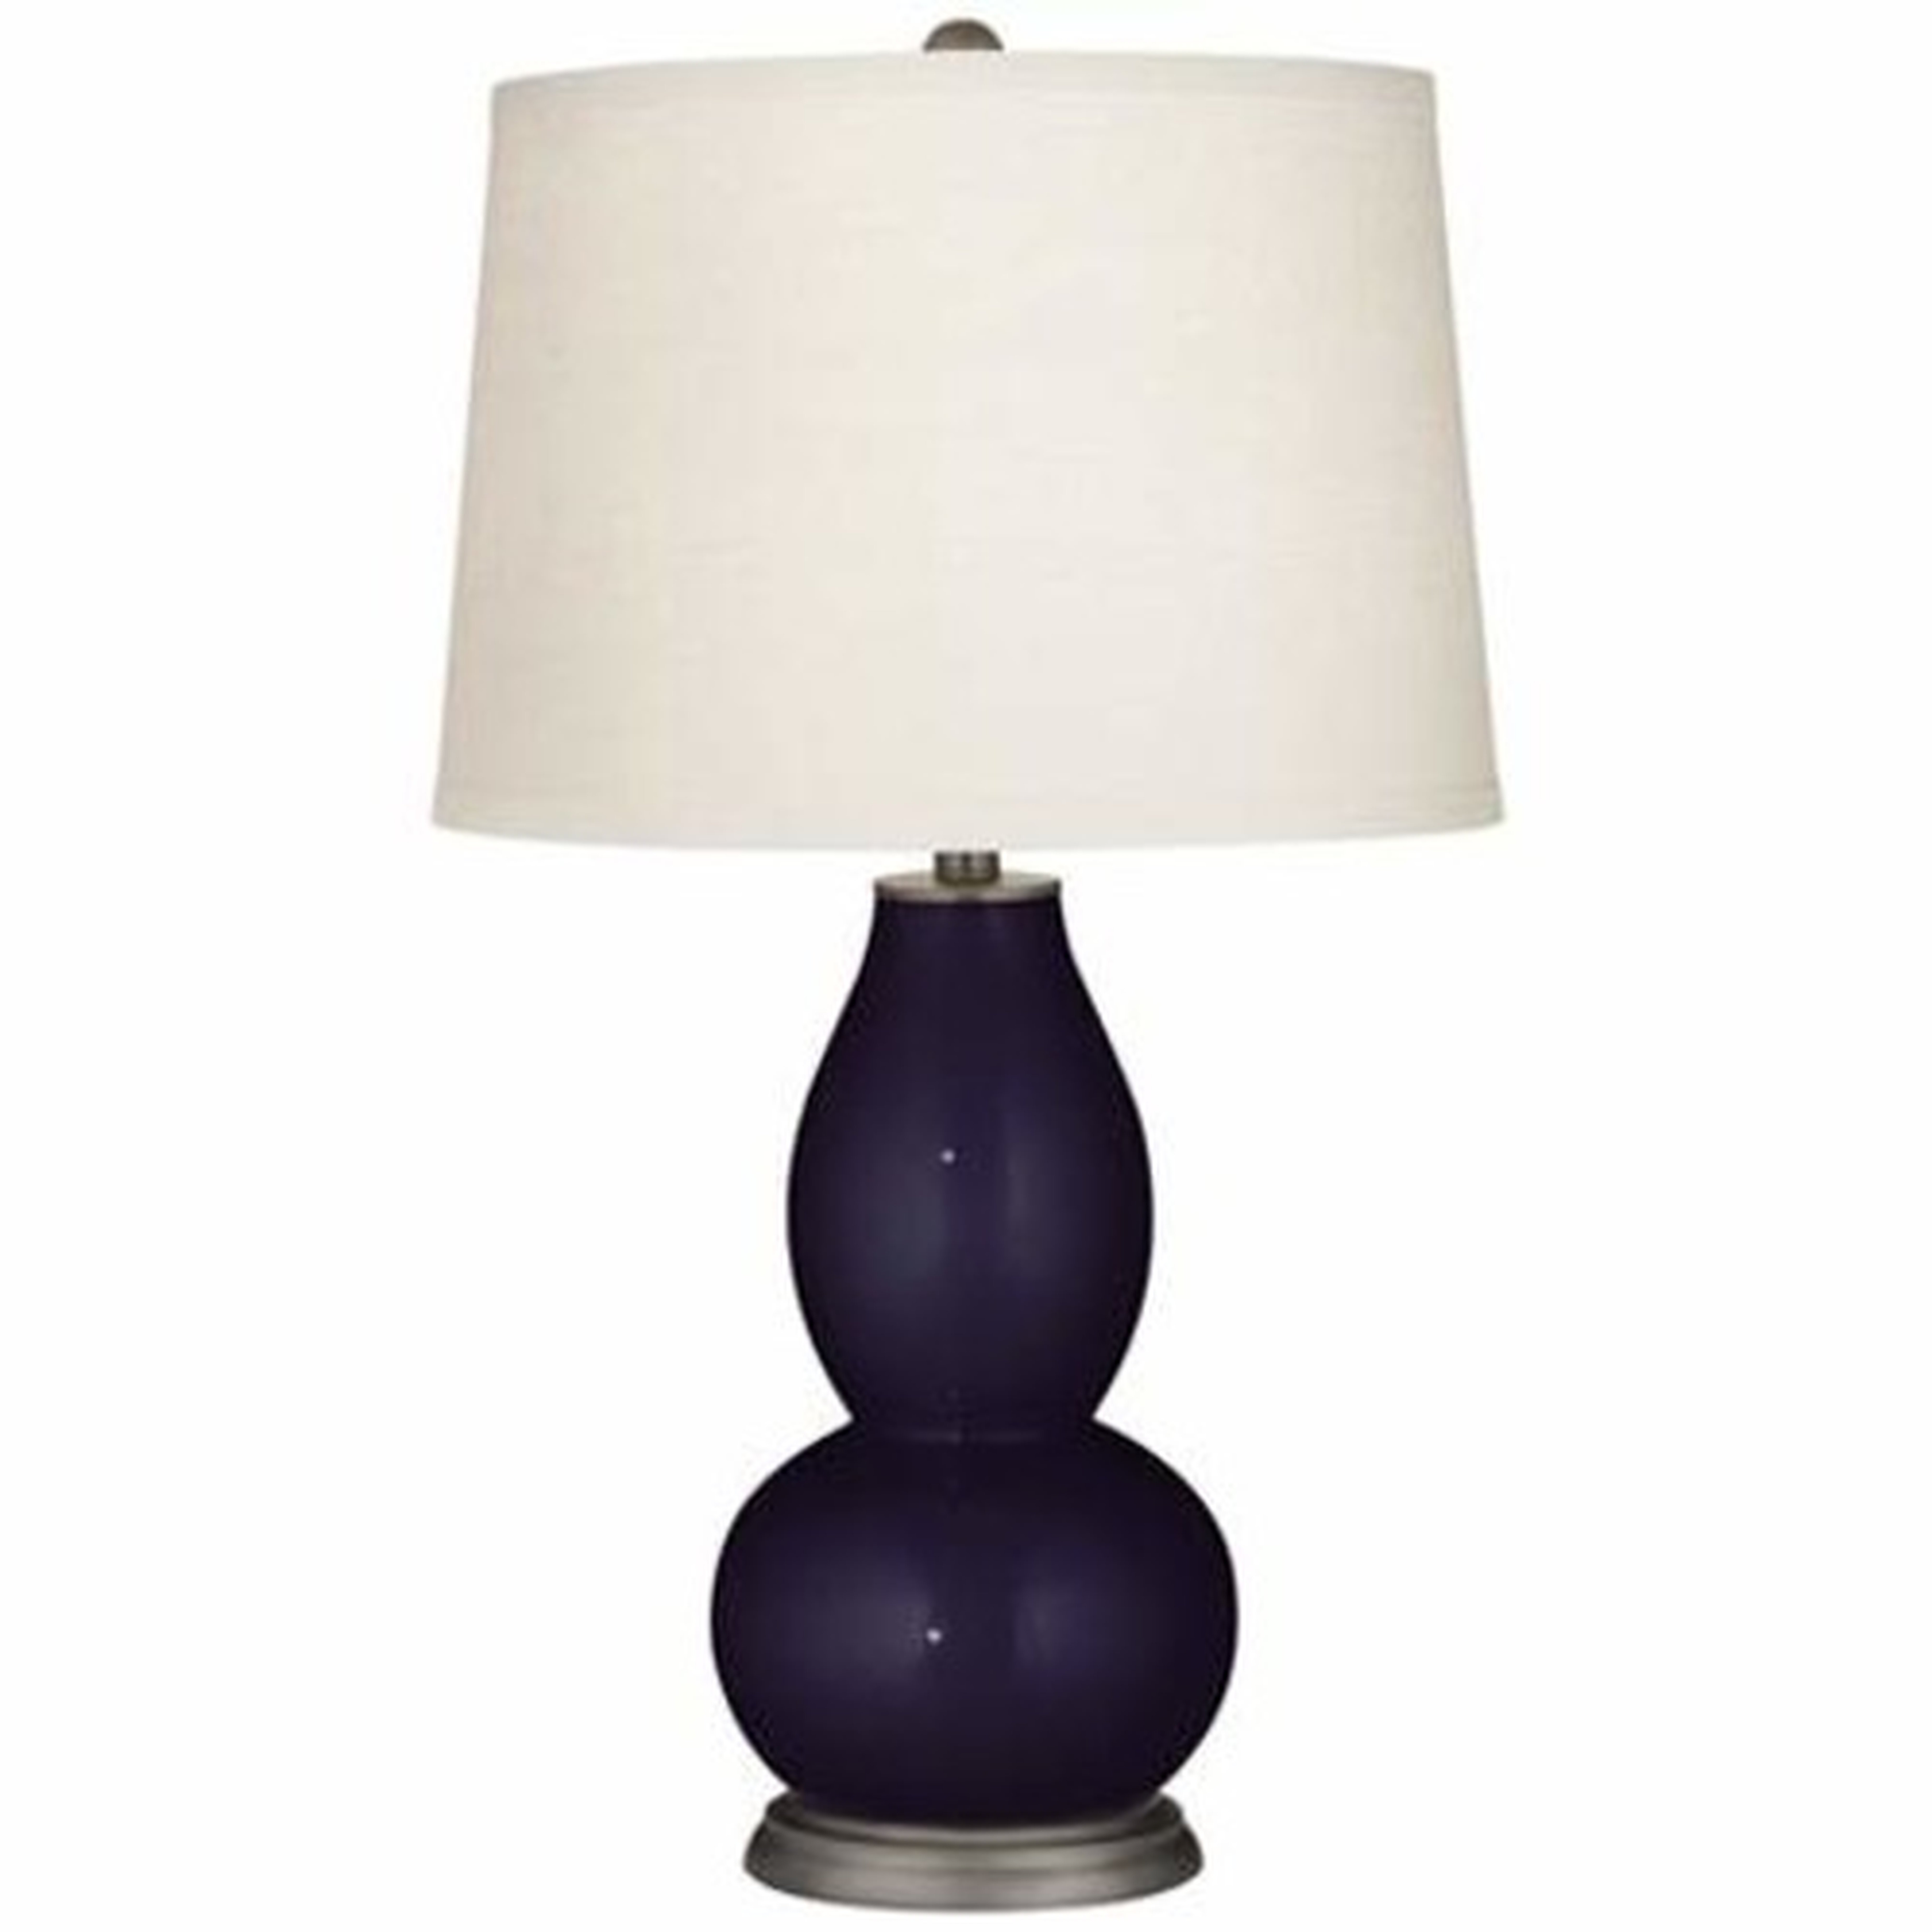 Midnight Blue Metallic Double Gourd Table Lamp - Lamps Plus